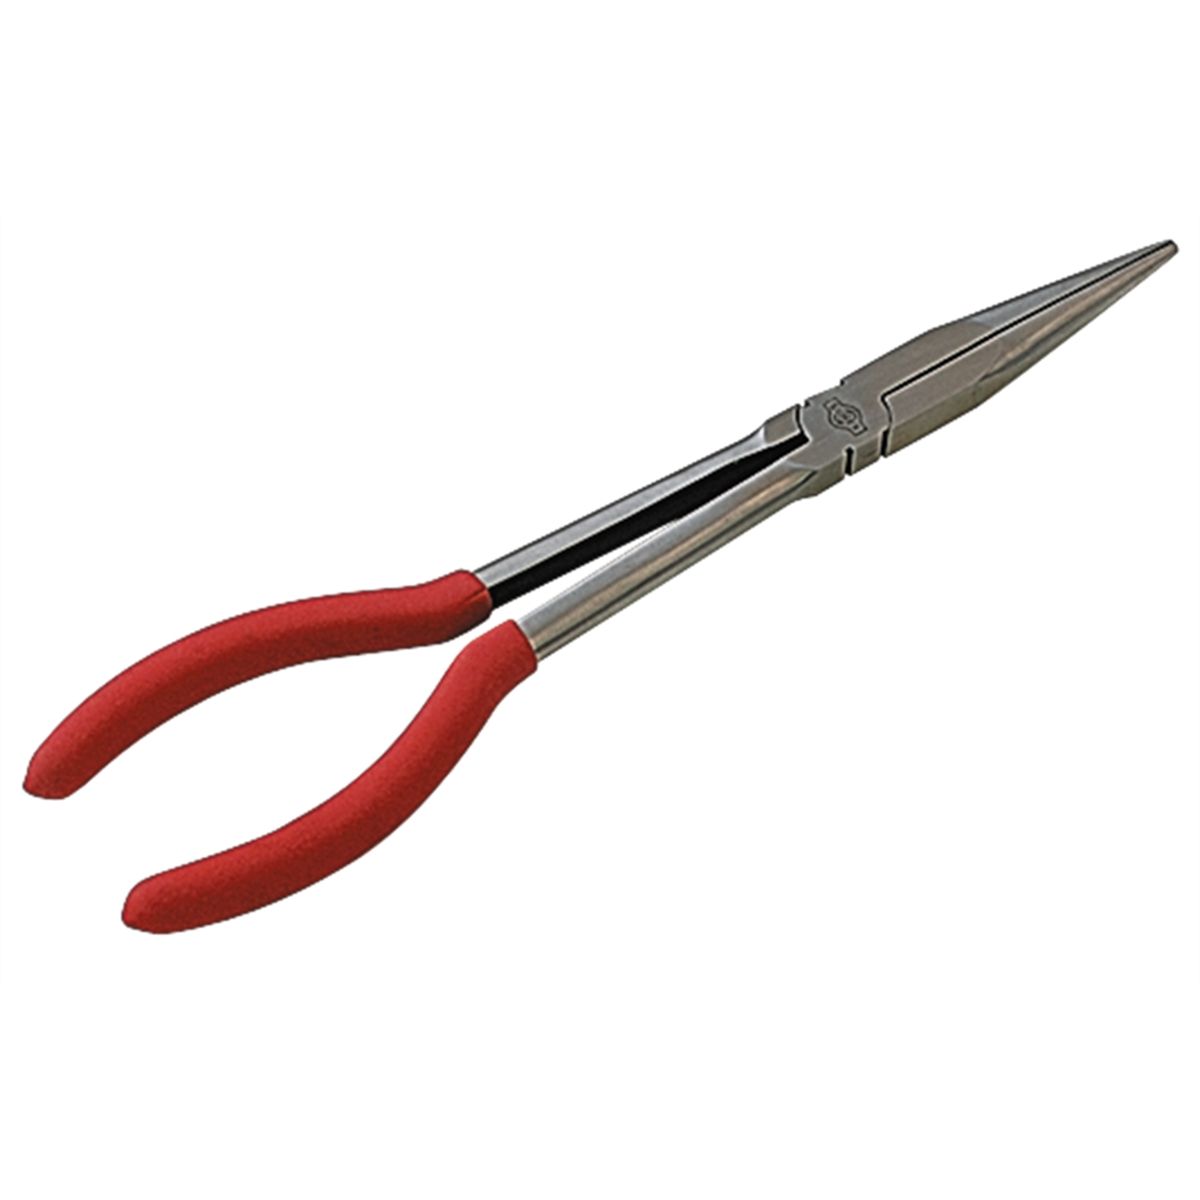 Straight 11" Needle Nose Pliers